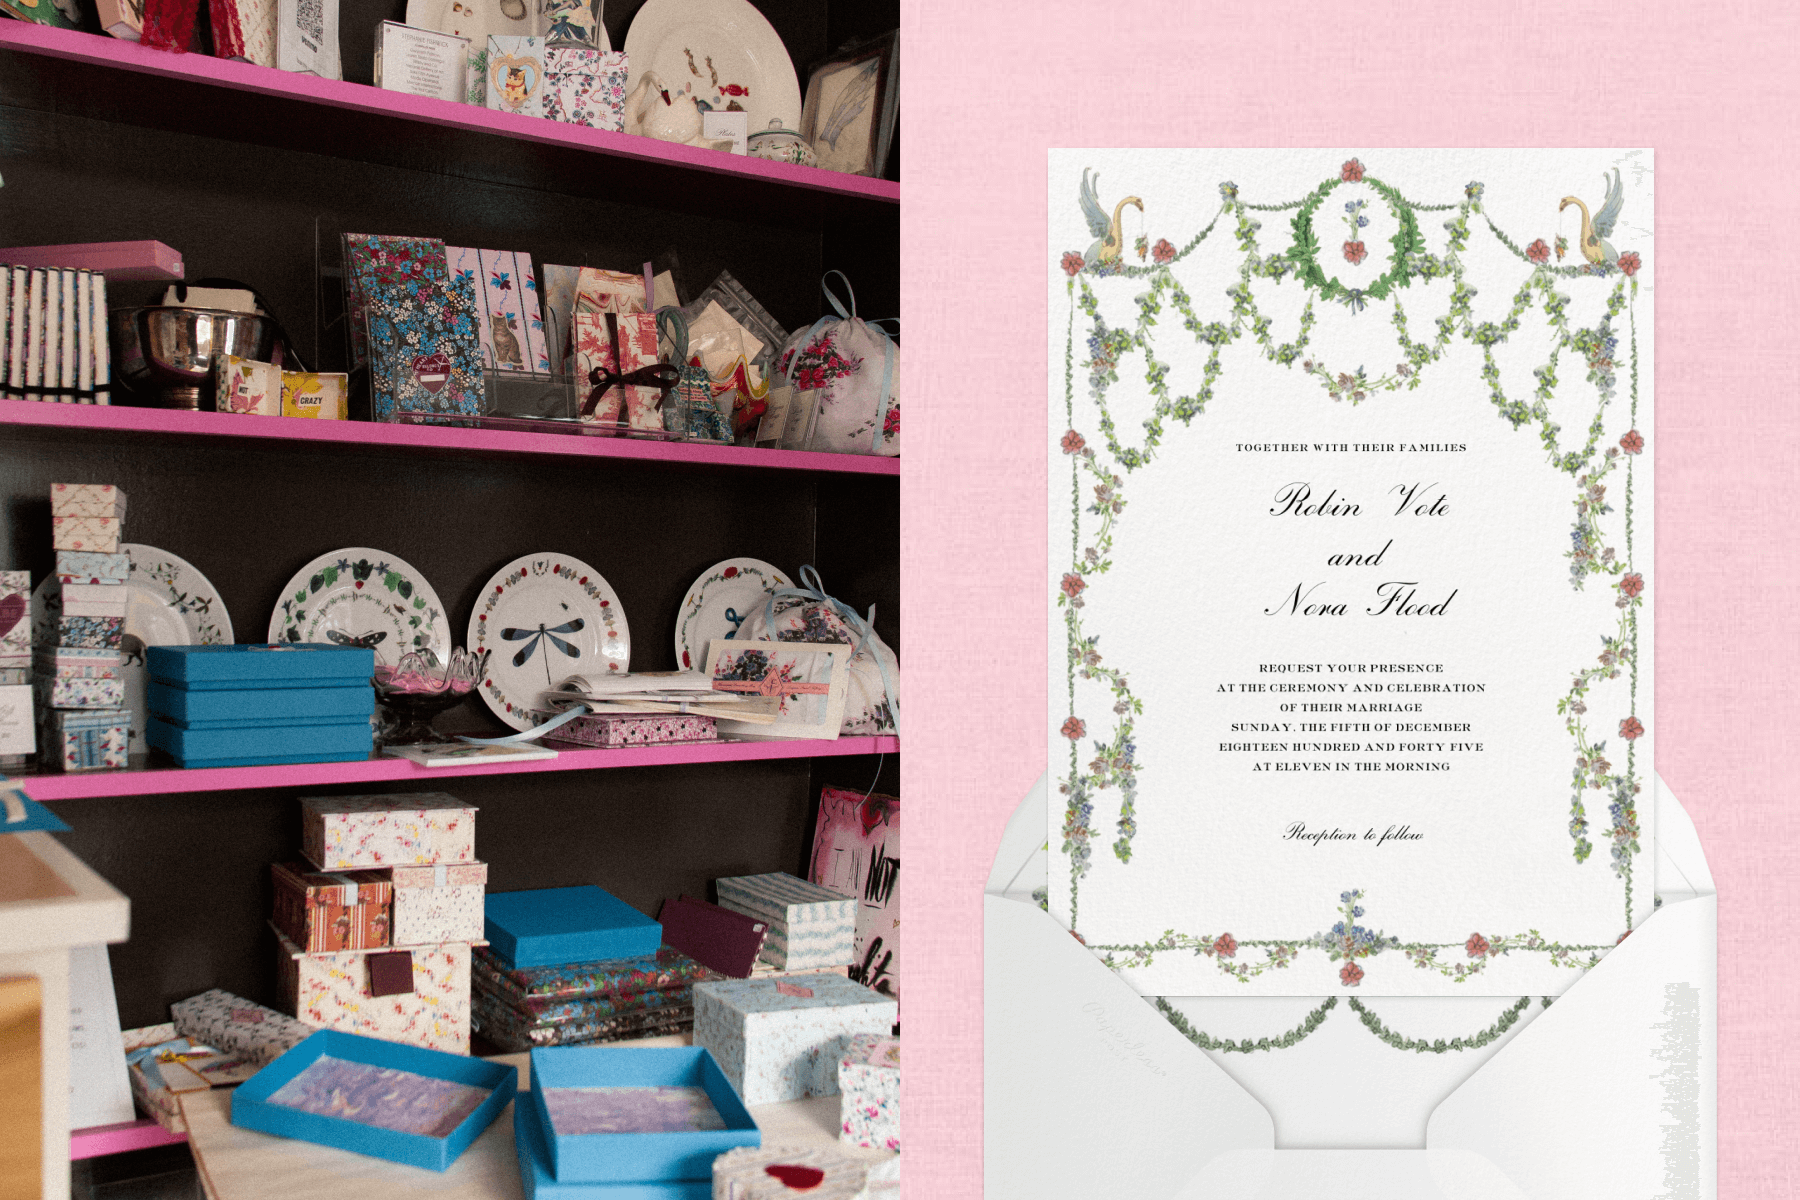 Left: Stephanie Fishwick’s shelves are filled with plates, journals, and more; Right: A floral Stephanie Fishwick wedding invitation.